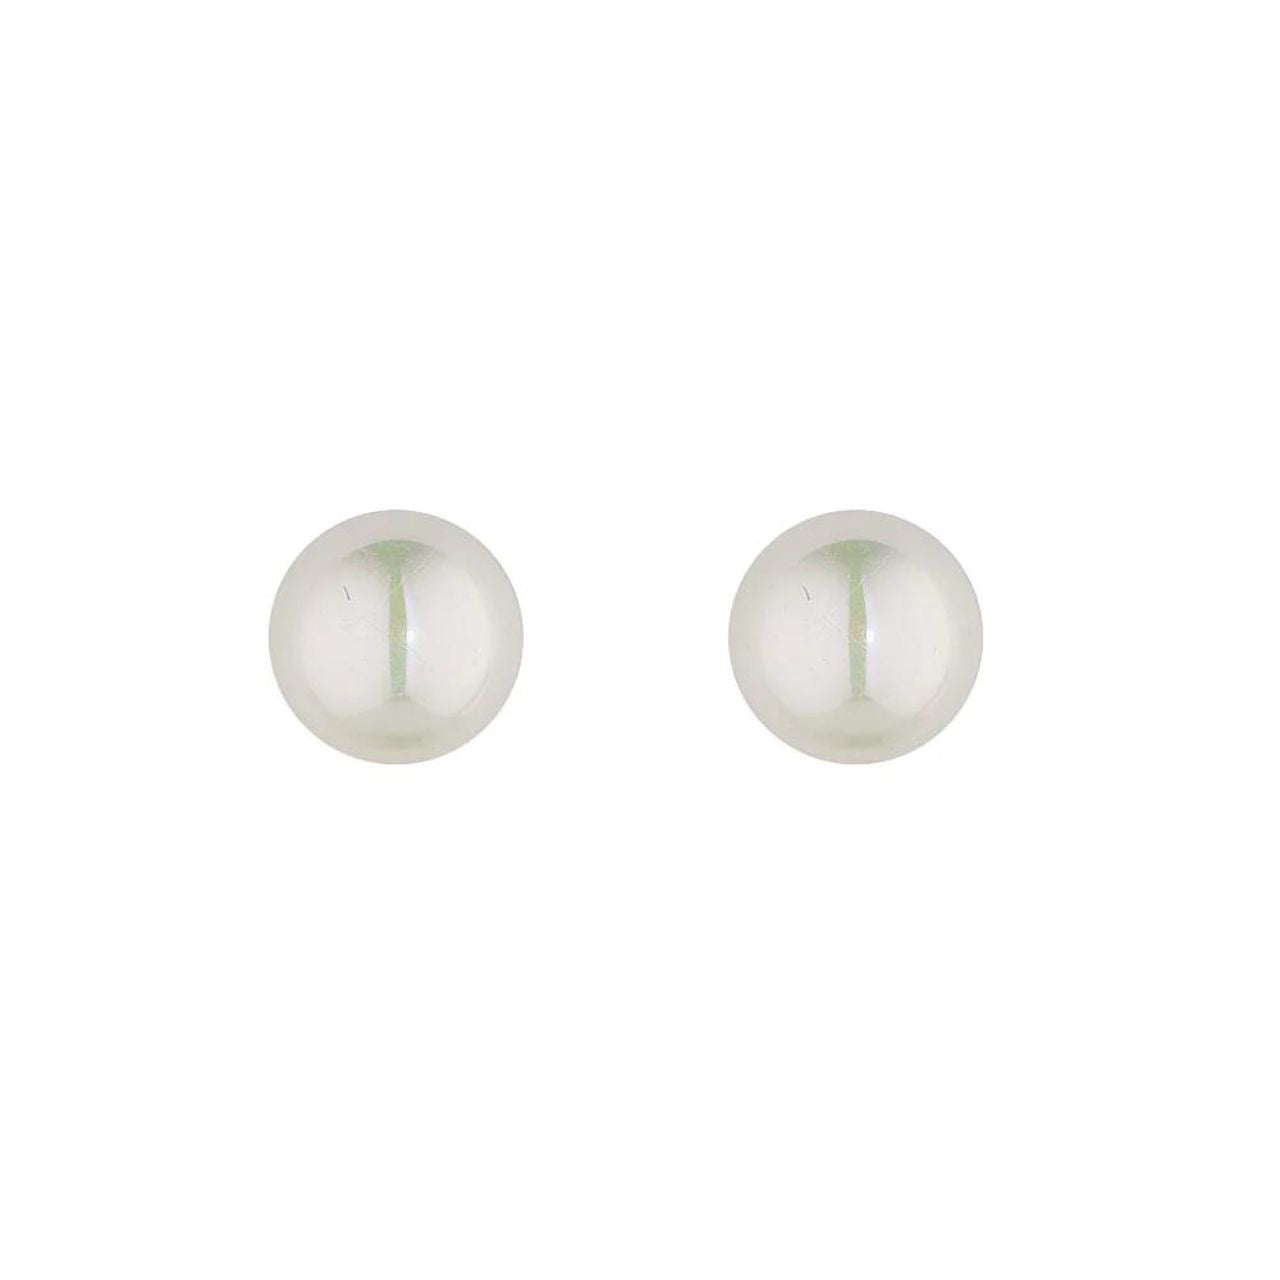 Pearl Stud Earrings 6mm by Knight & Day  These 6mm Pearl Stud Earrings from Knight & Day offer an ideal accessory for any outfit.  6mm pearl studs with AB white shell pearls.